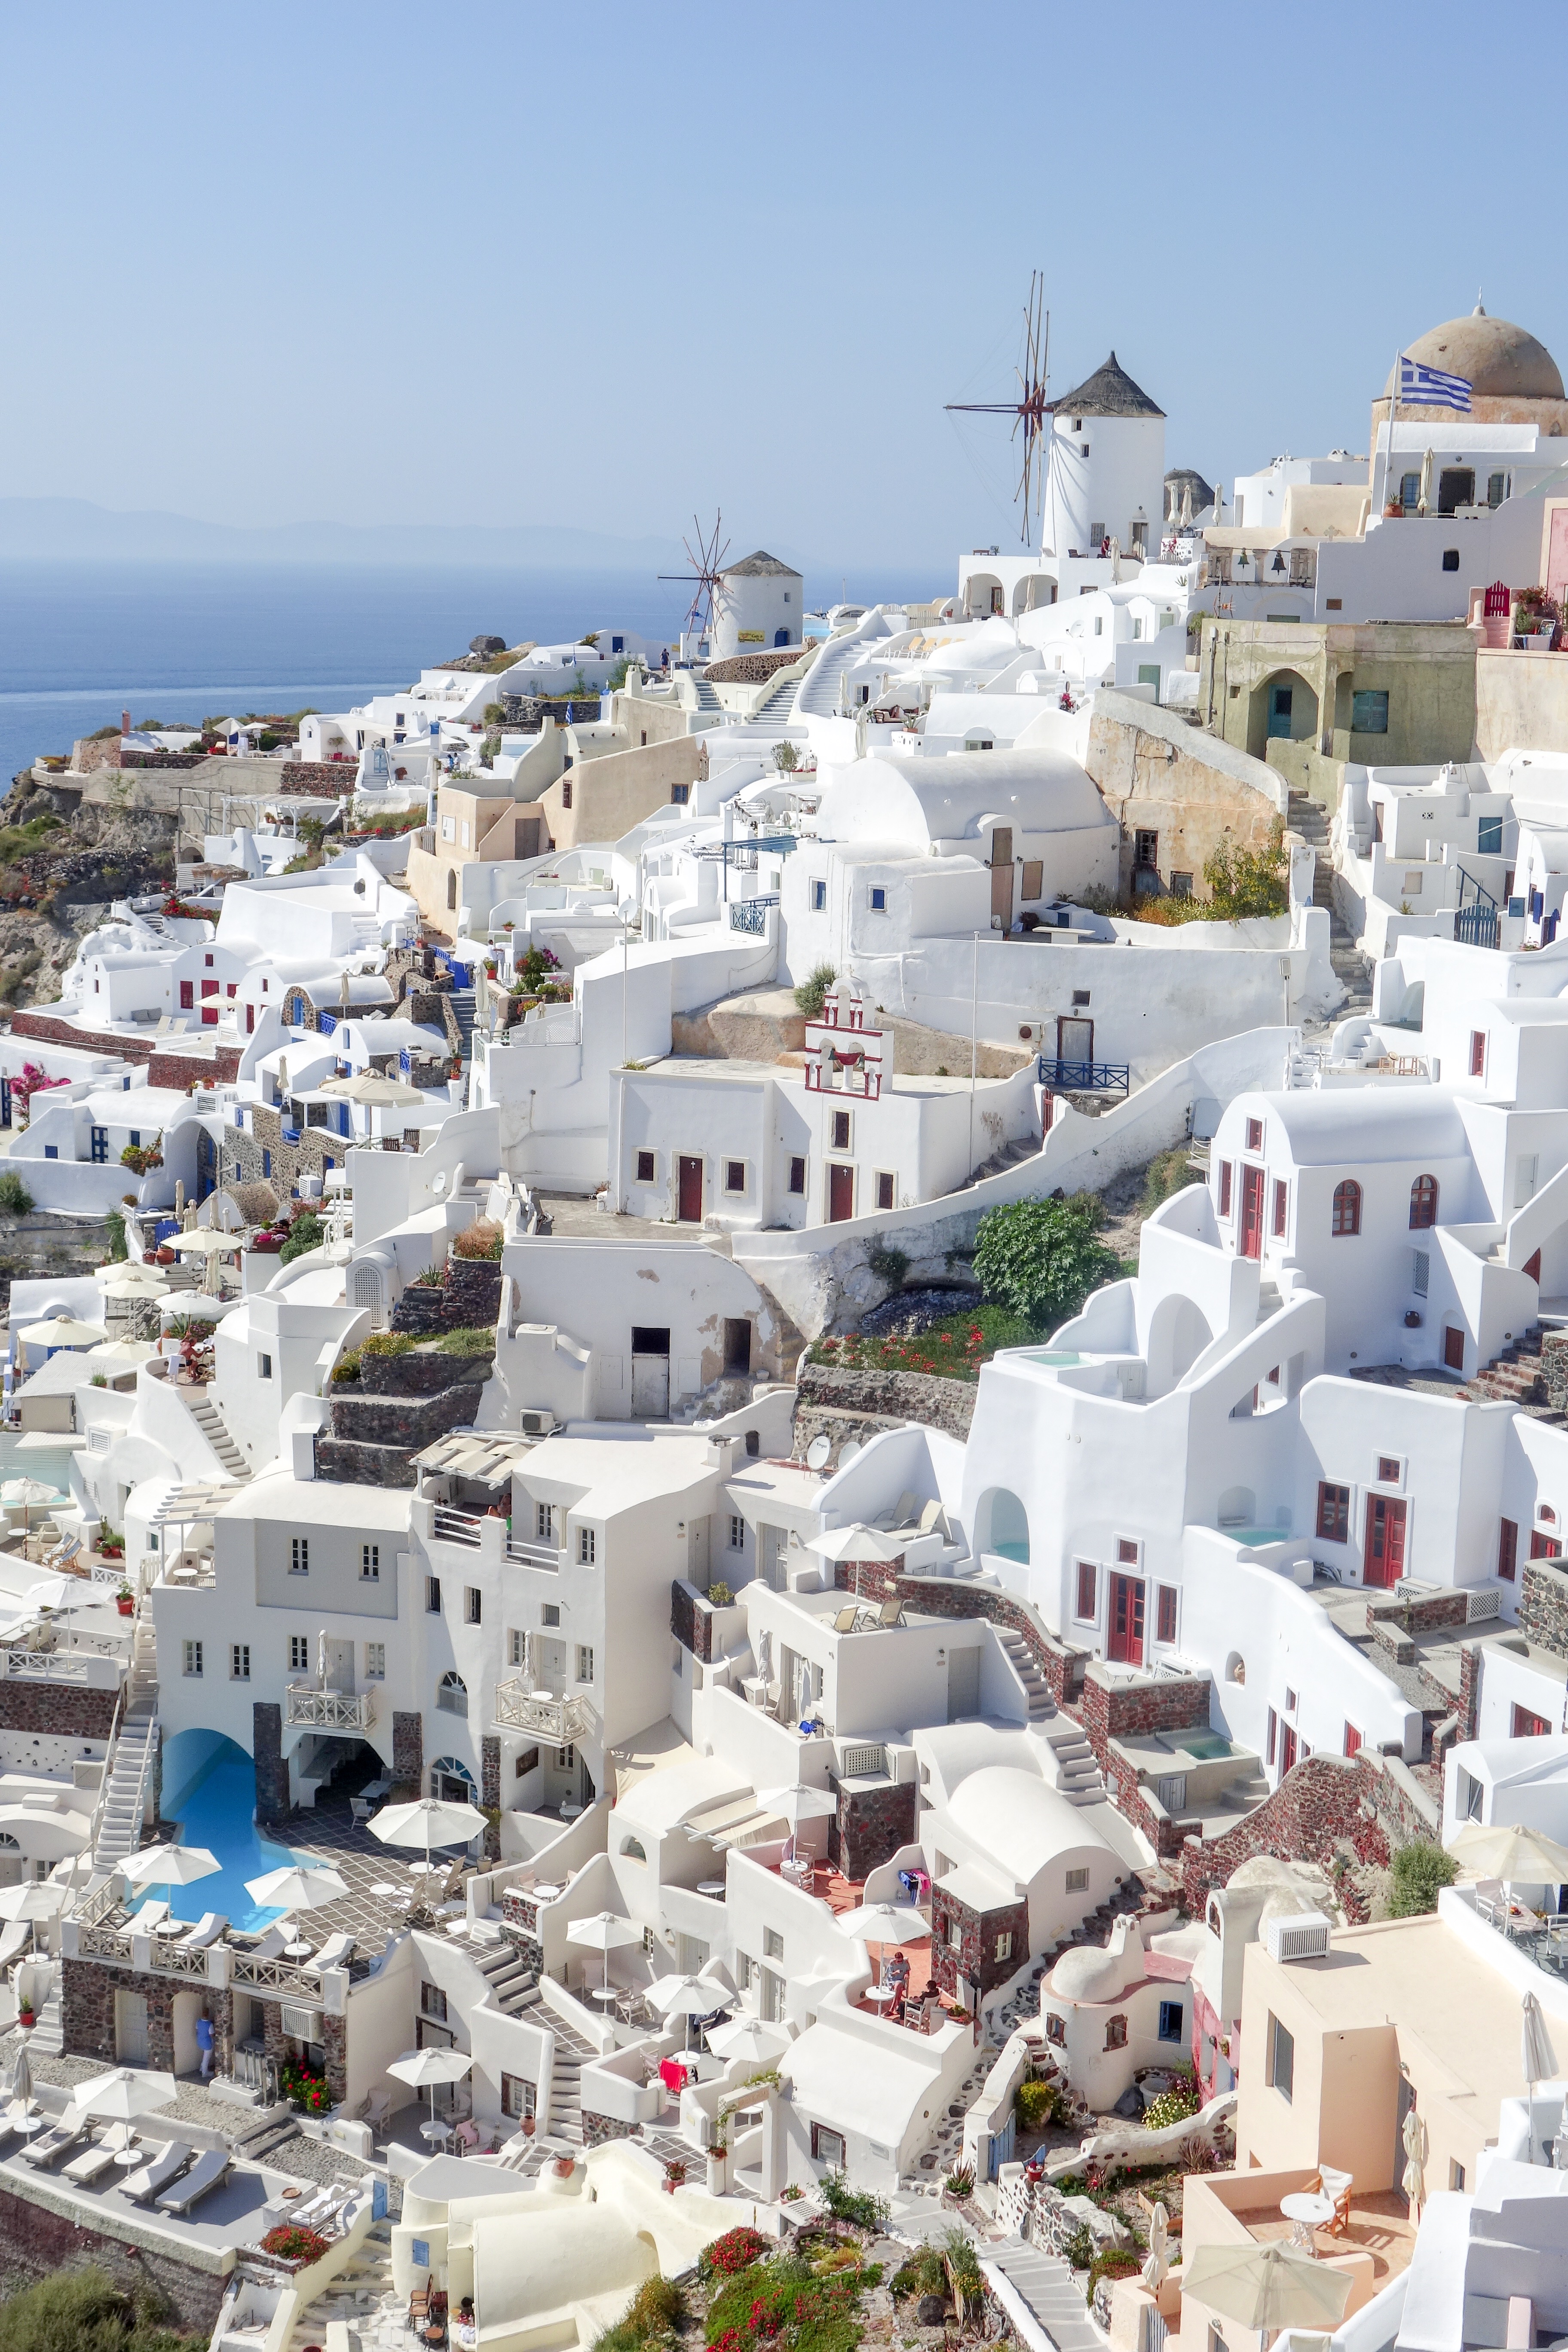 Complete Santorini travel guide. Includes a downloadable google maps which highlights the must explore, where to eat and insta-worthy spots. #santorini #travelguide #googlemaps #downloadablemap #greece #santoriniinsta 